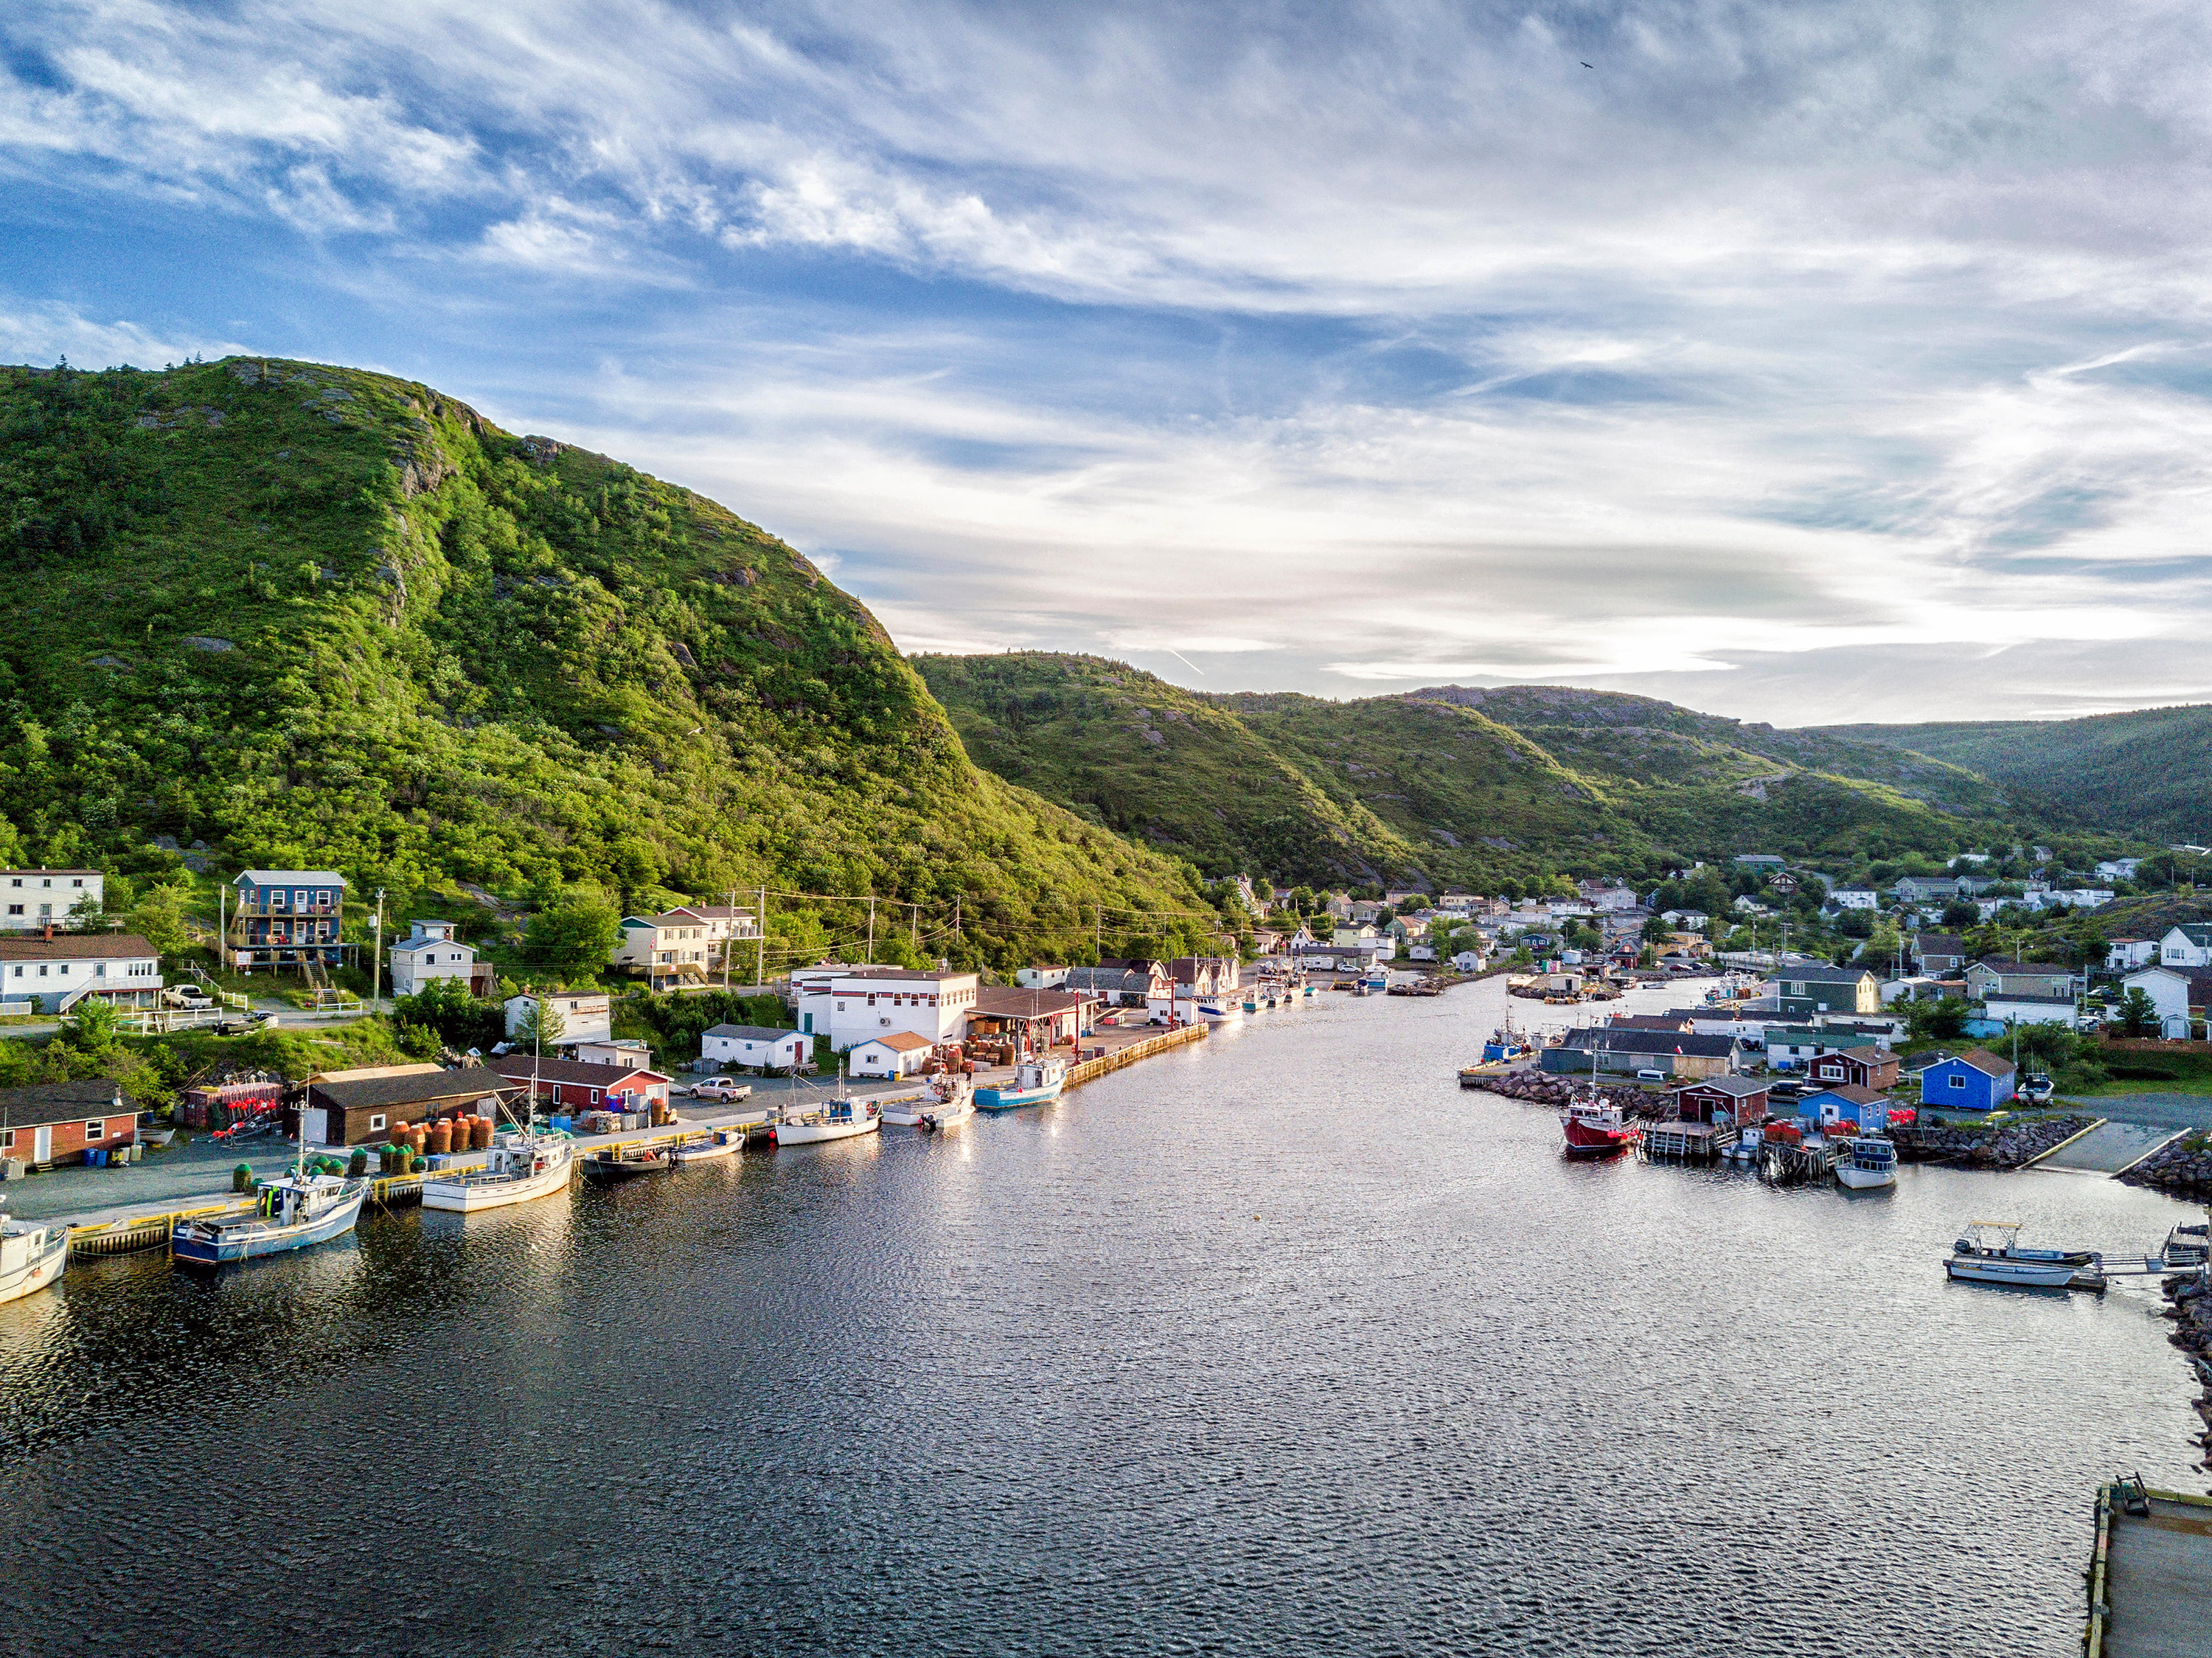 Slide 6 of 41: Charming Petty Harbour with green hills and colorful wooden architecture, Newfoundland, Canada